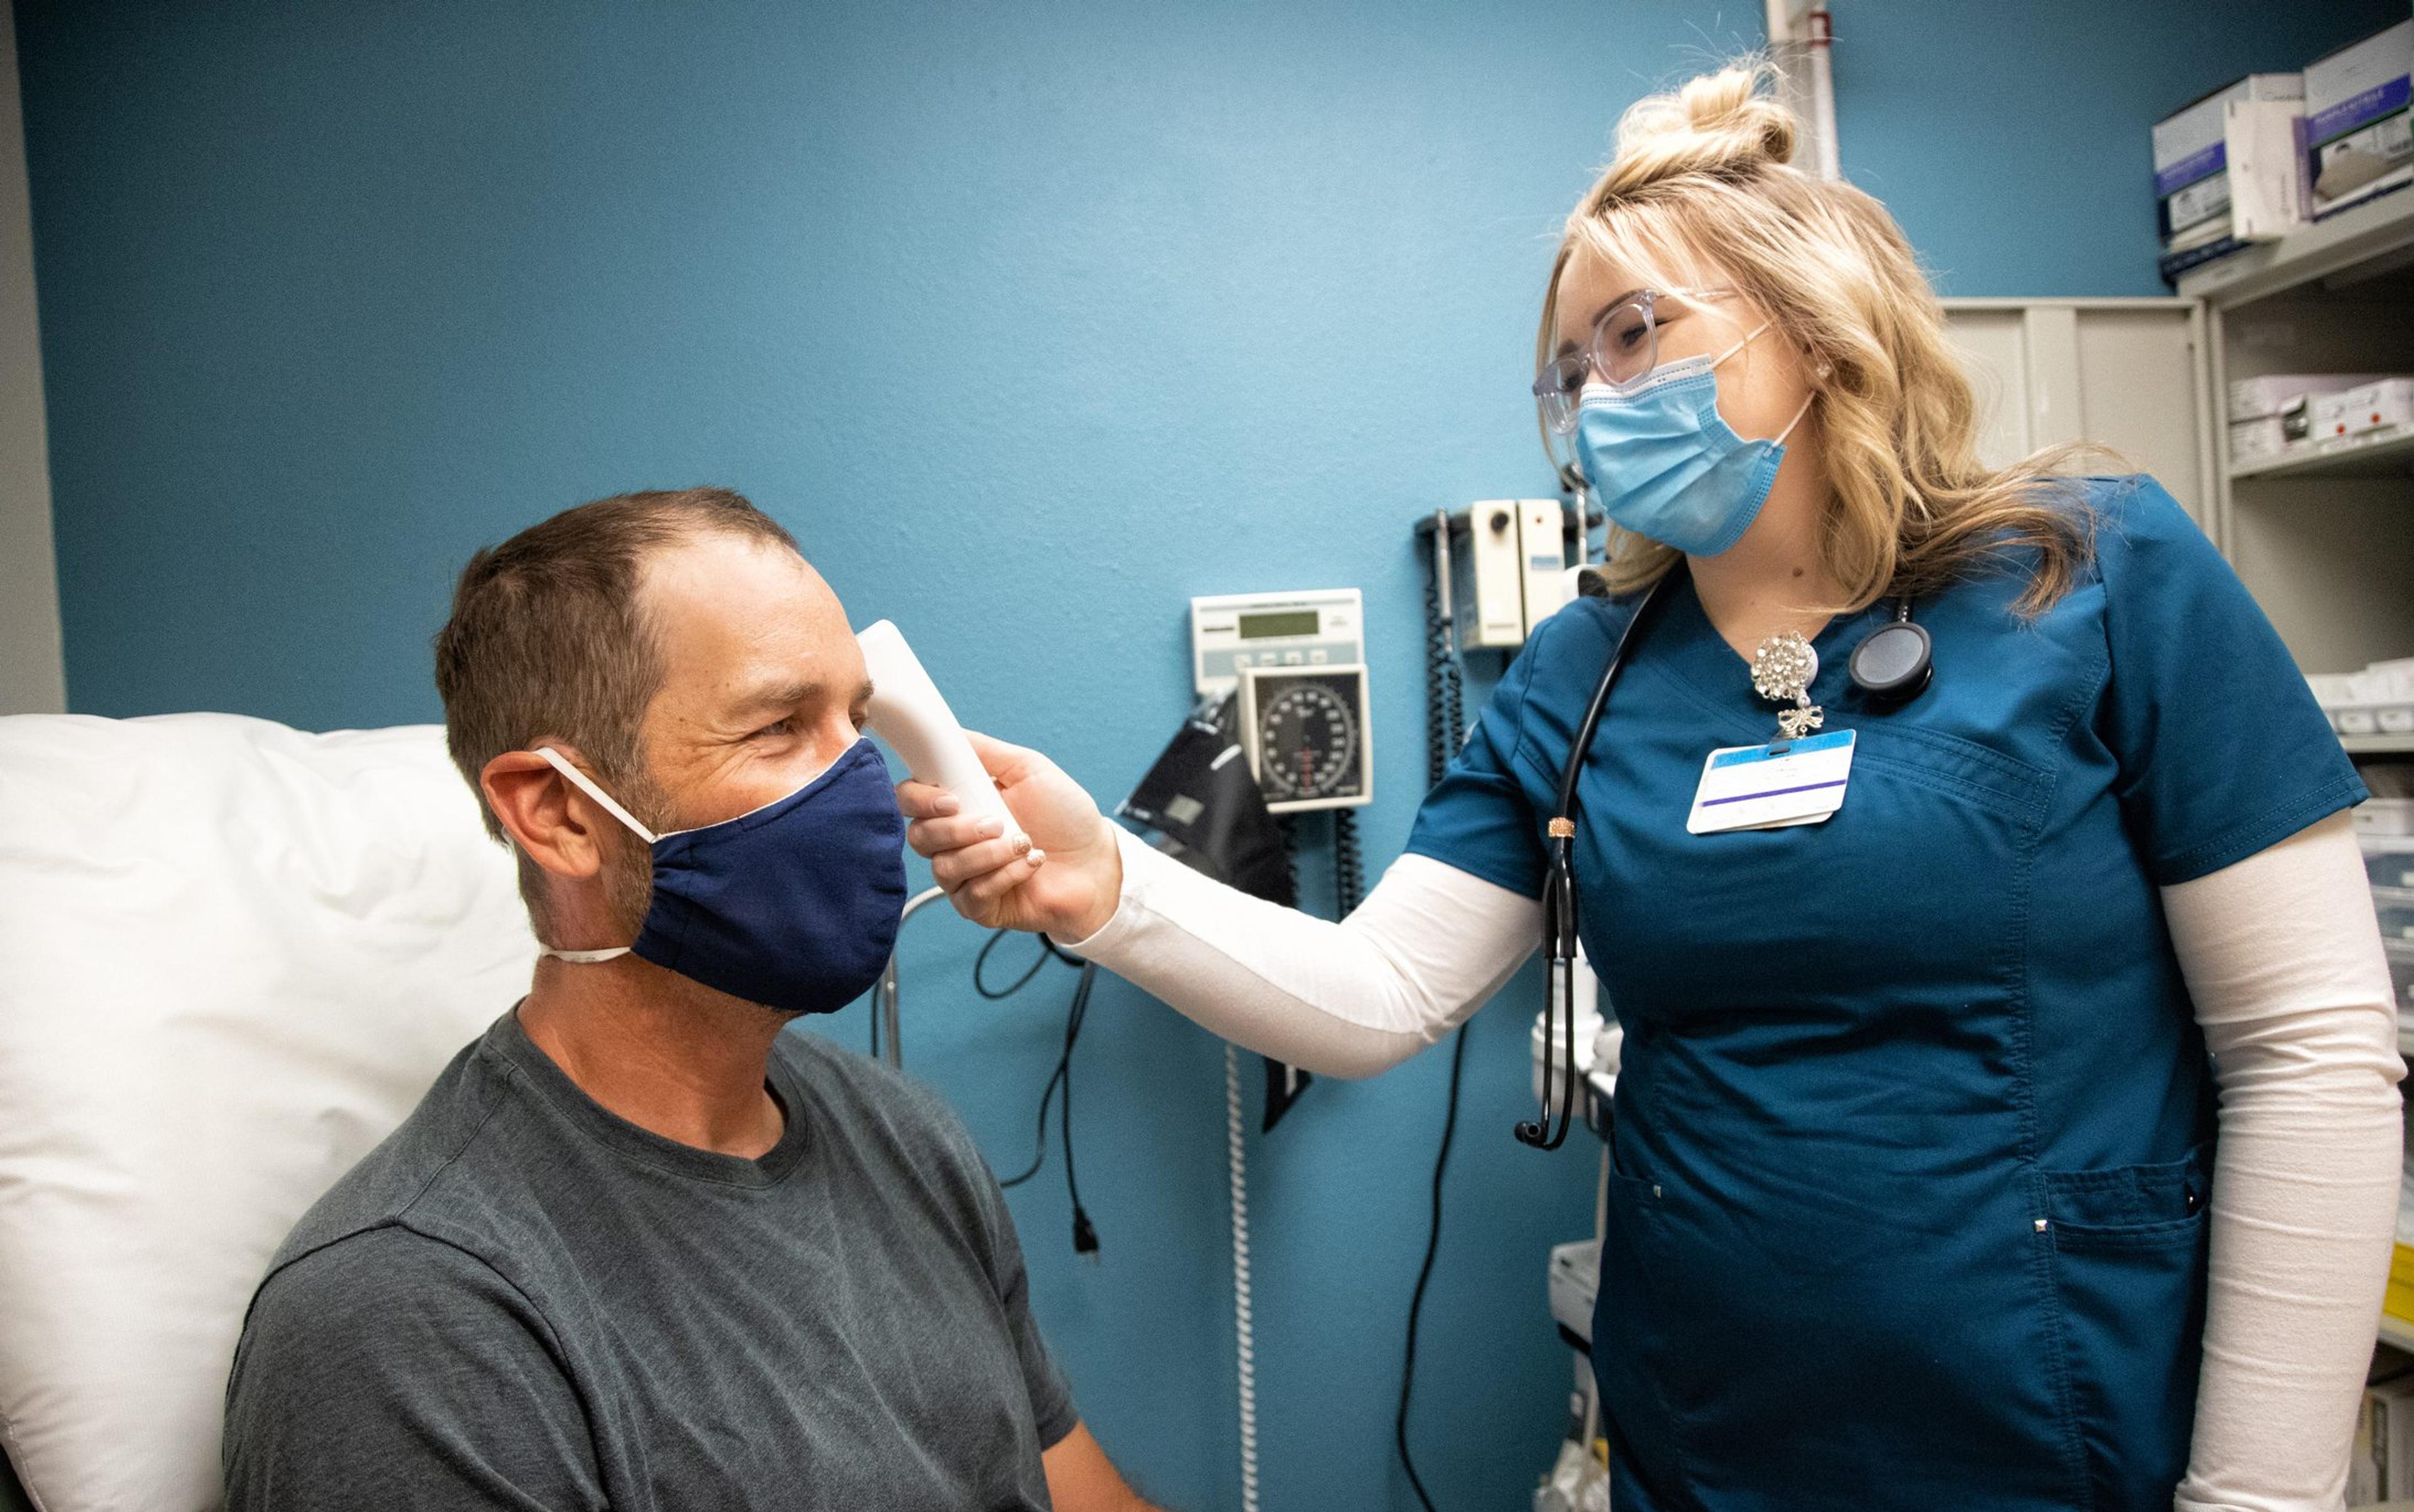 Nurse wearing a mask takes the temperature using a forehead thermometer